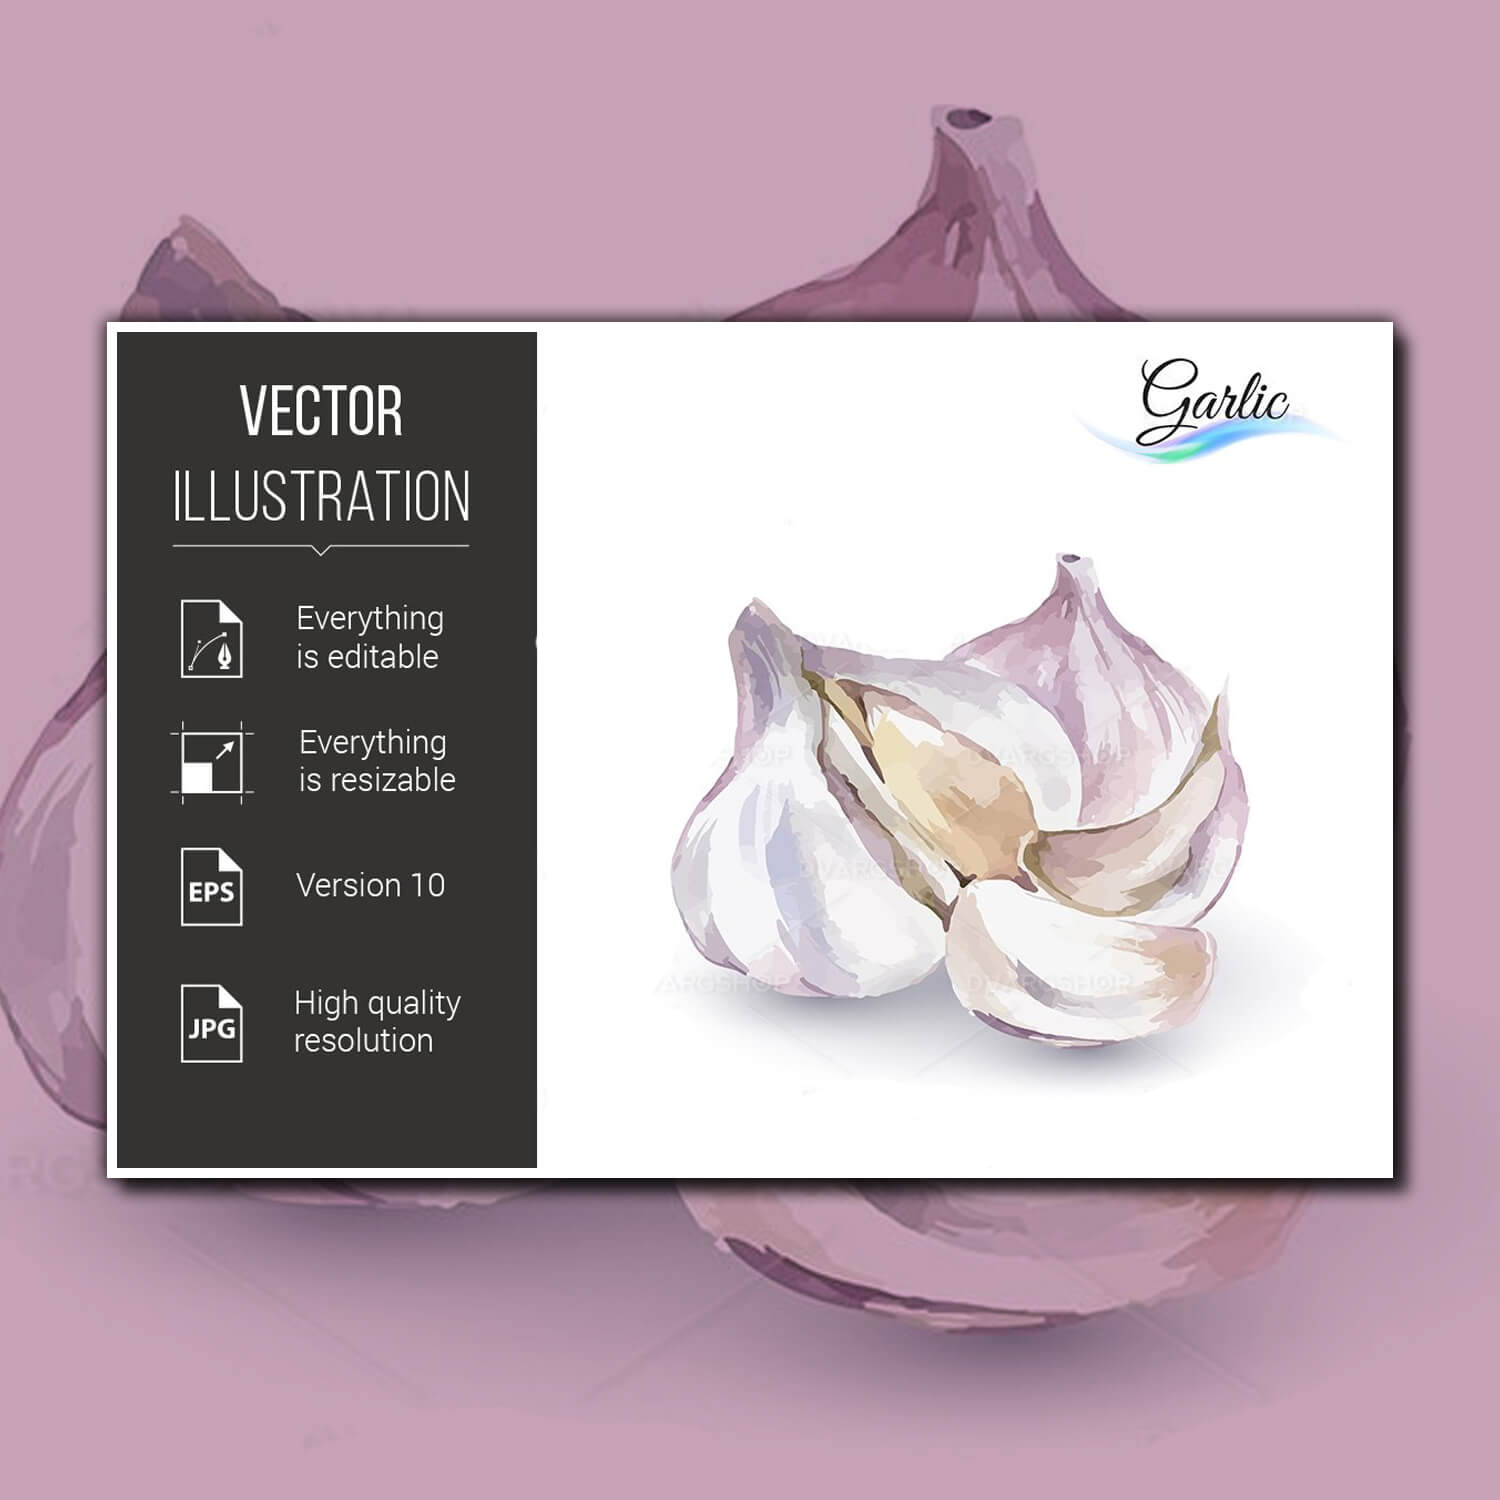 The image of garlic of different sizes is drawn in watercolor.